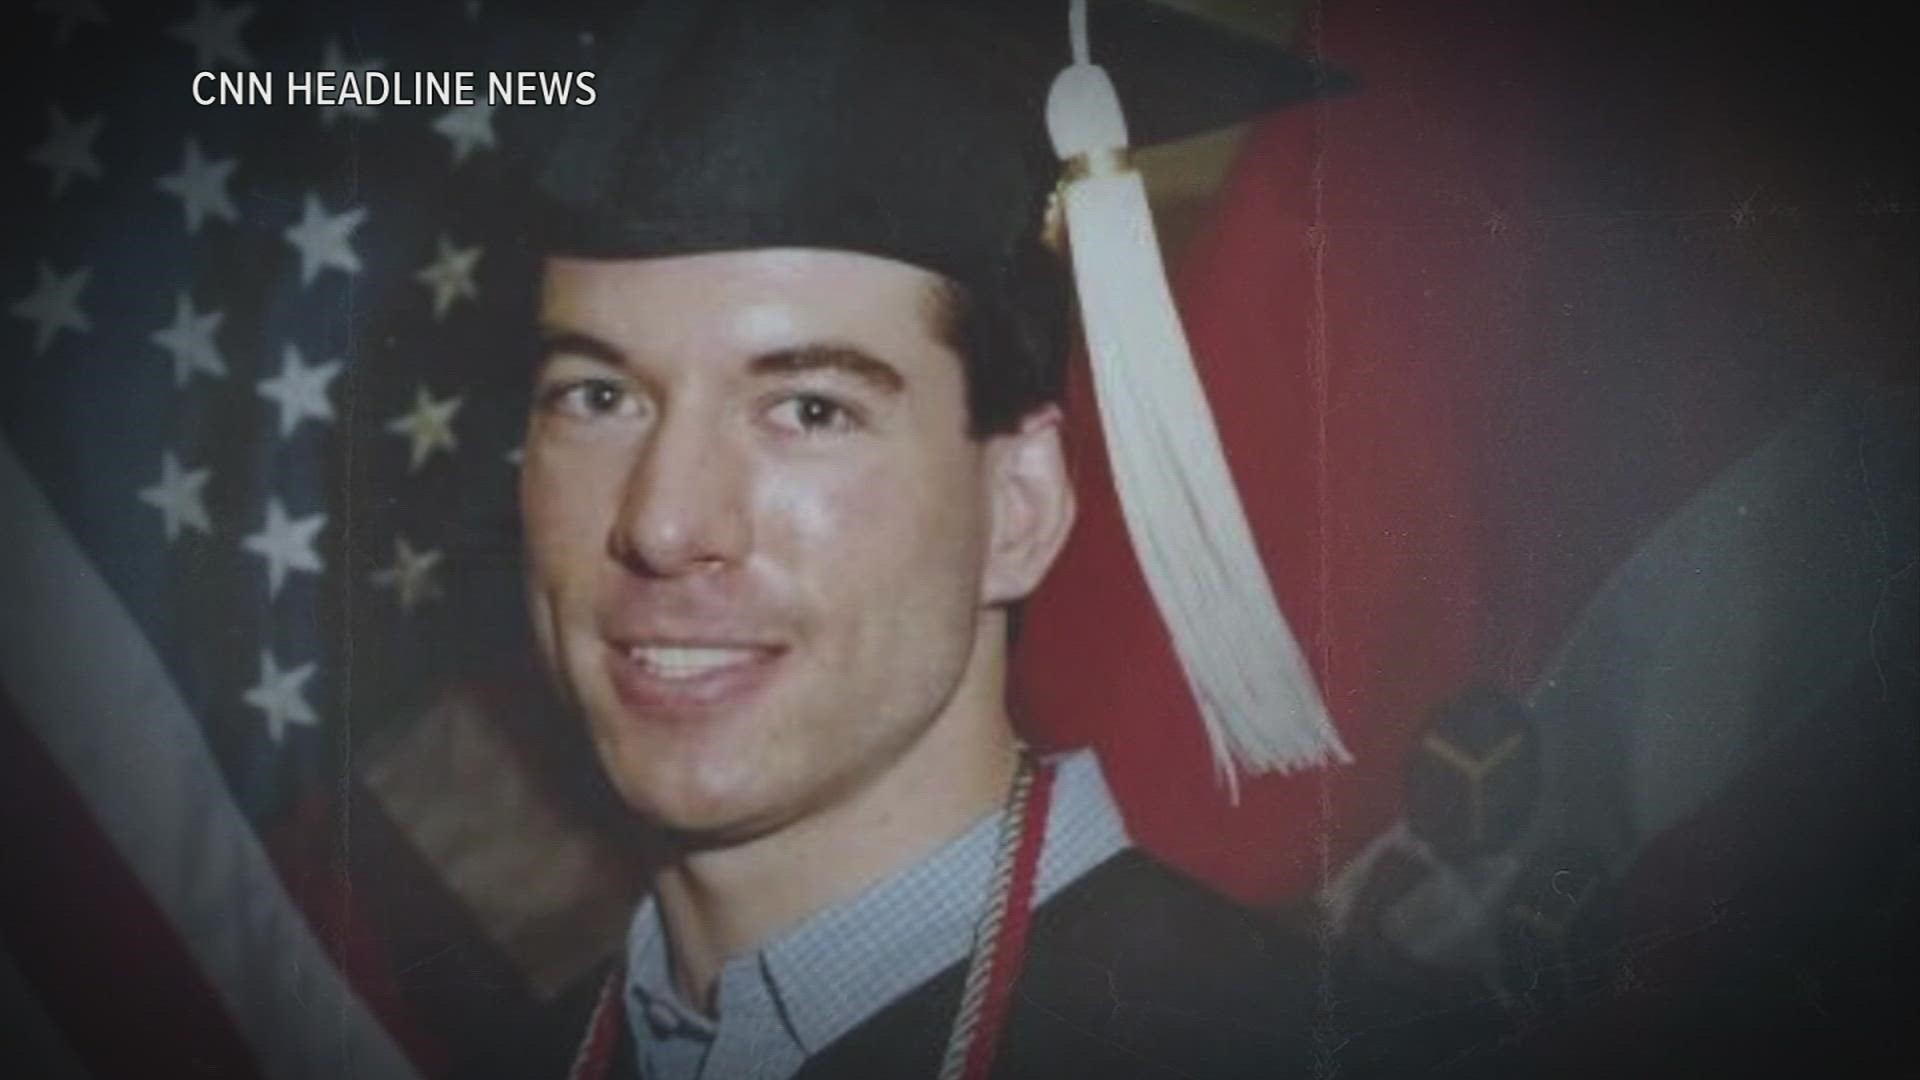 The episode of HLN's "Real Life Nightmare" covers Brian Shaffer, a central Ohio man who was last seen at a local bar in 2006.